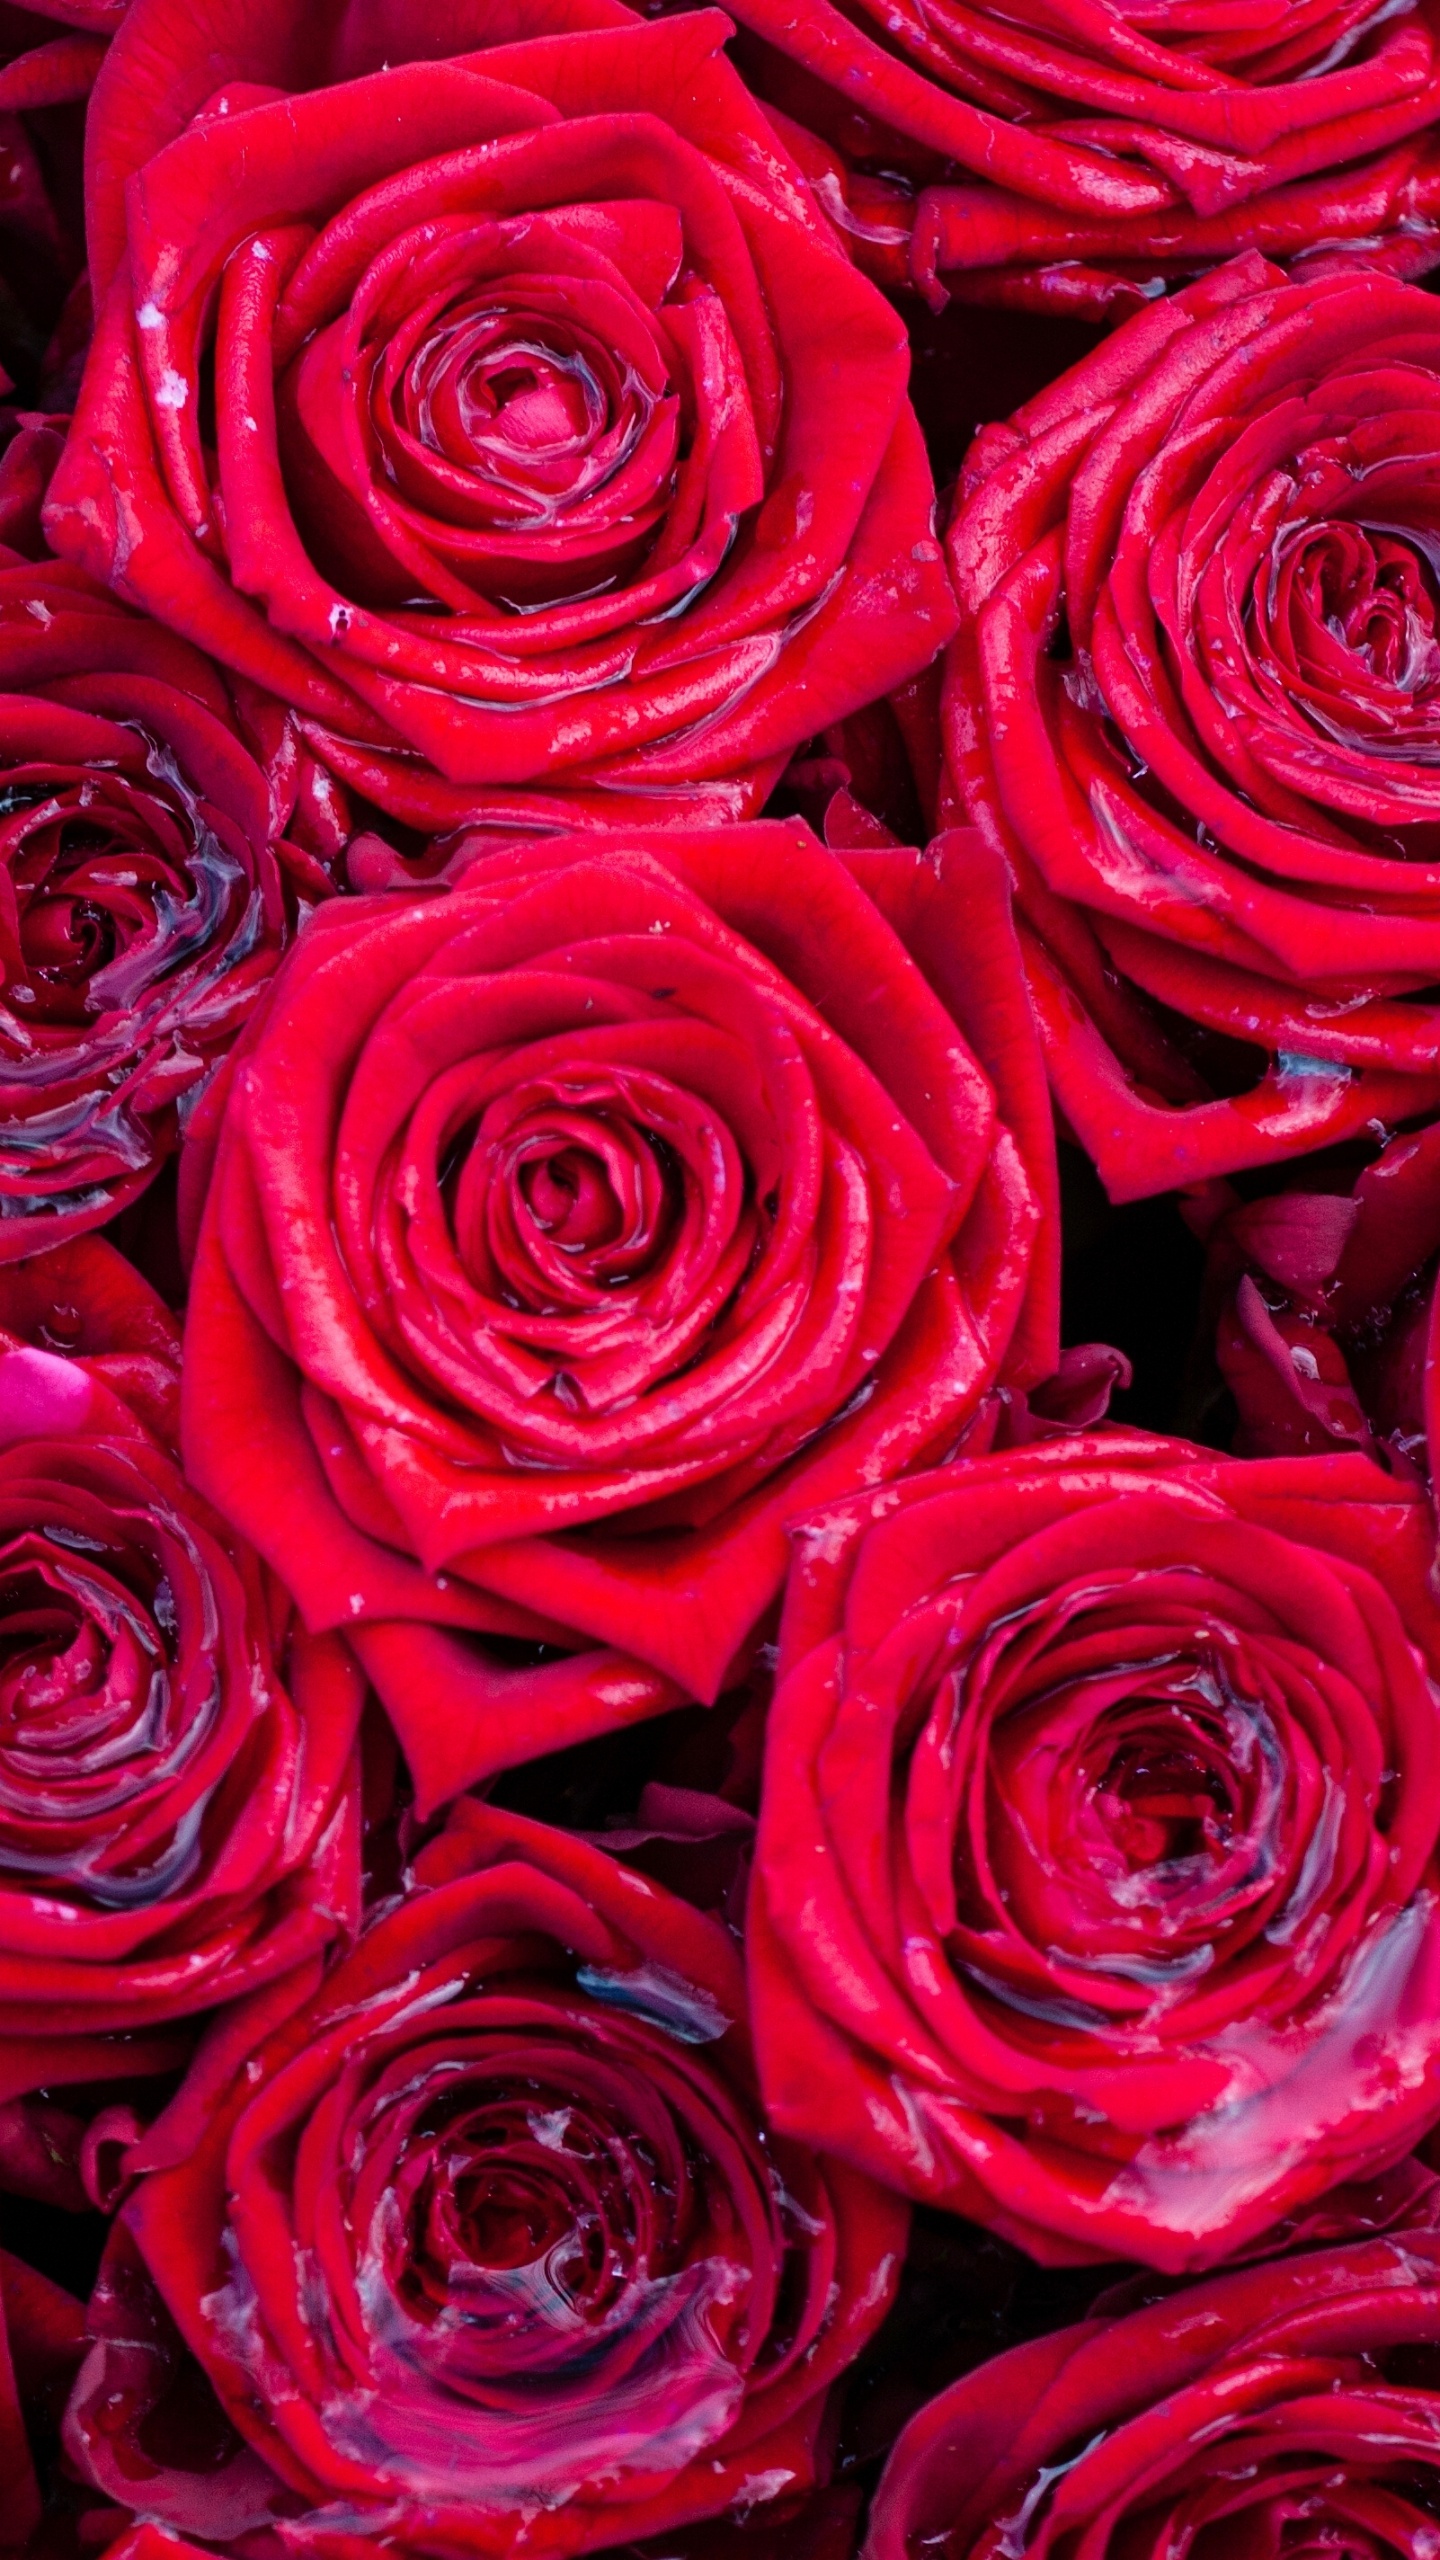 Roses Rouges en Photographie Rapprochée. Wallpaper in 1440x2560 Resolution